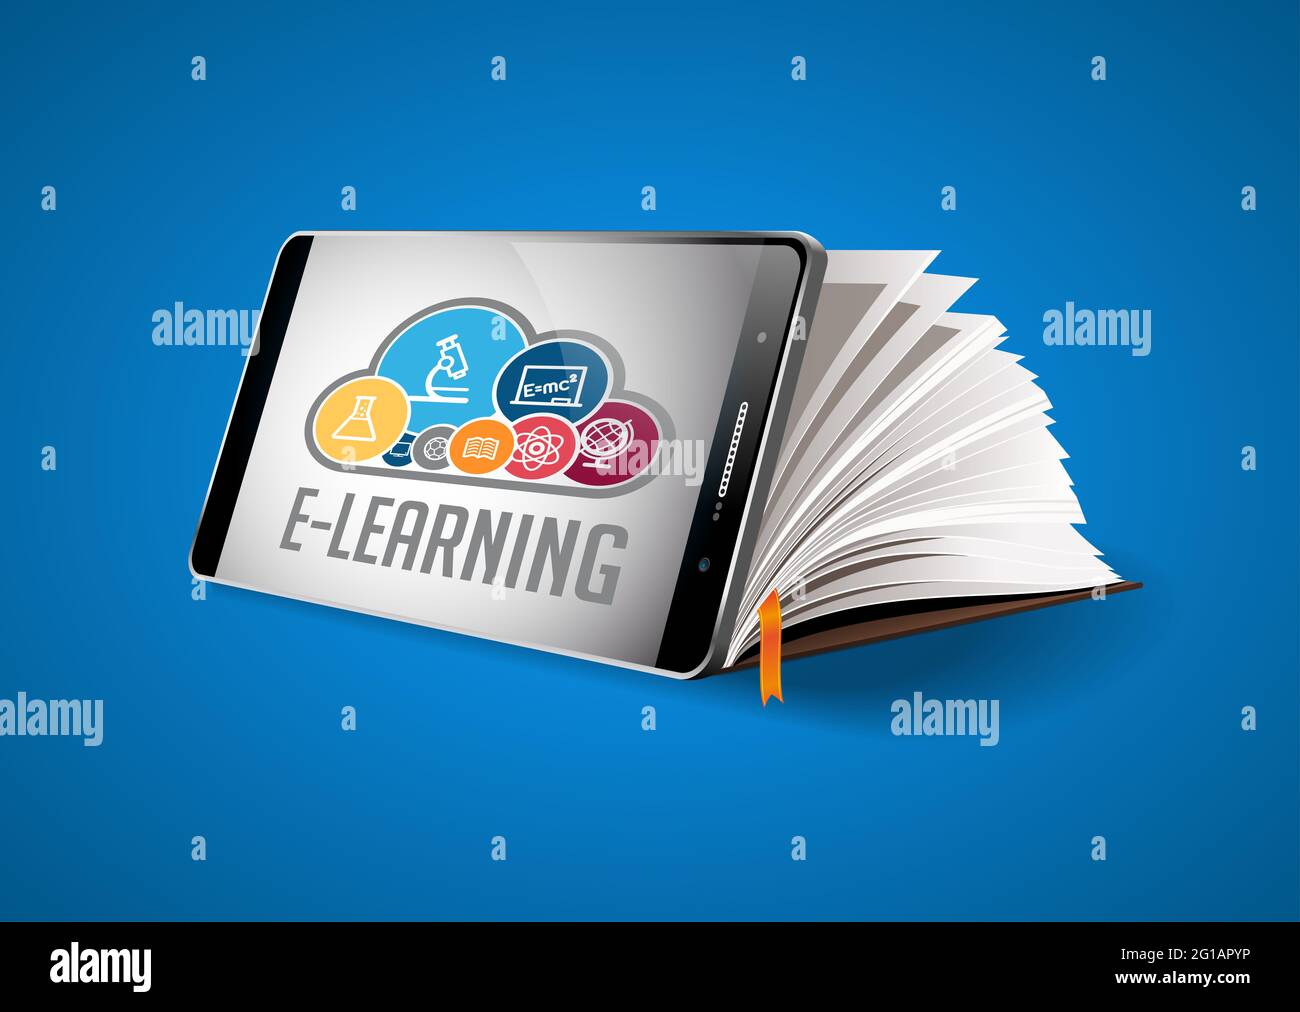 Elearning concept - mobile phone as book with word E-LEARNING Stock Photo